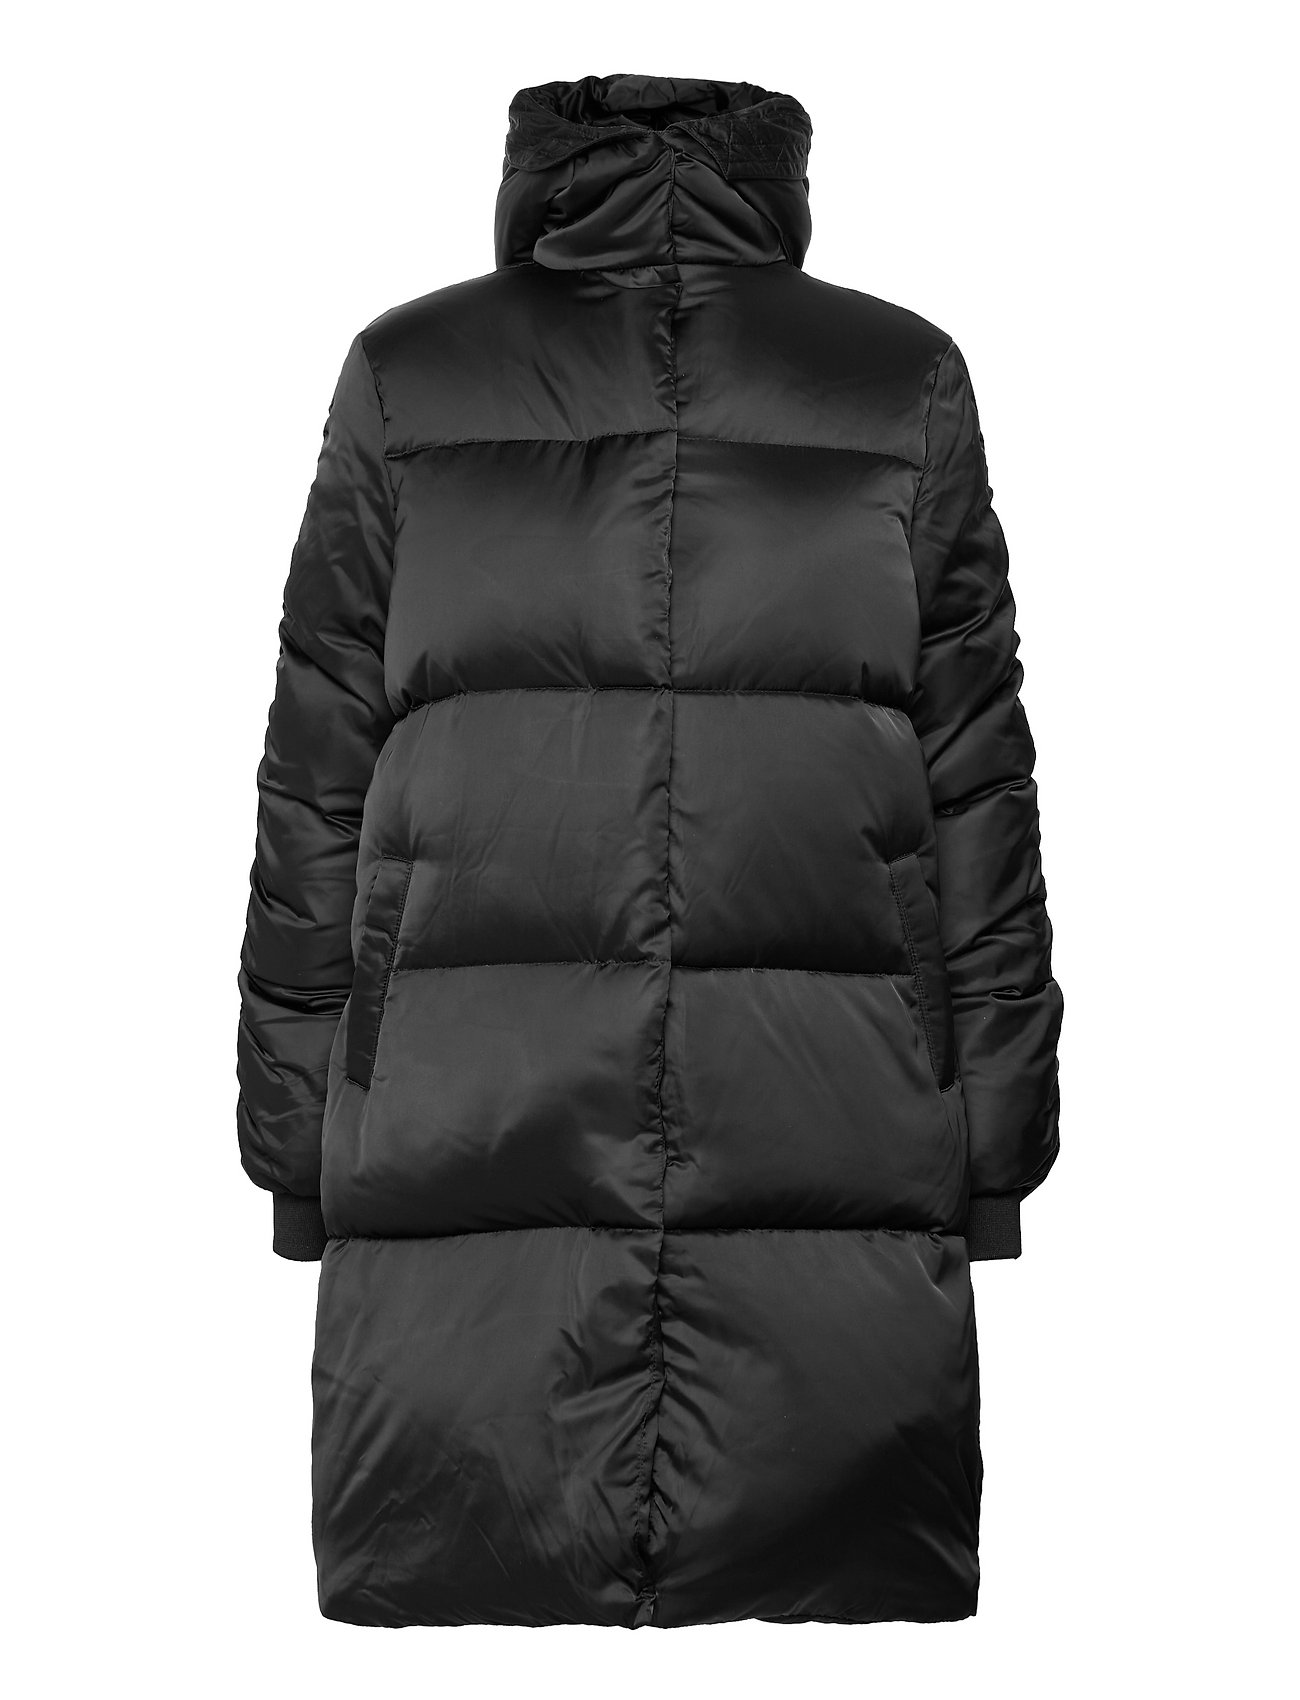 2NDDAY 2nd Puff - Winter Satin - 92.40 €. Buy Padded Coats online at Boozt.com. Fast and easy returns